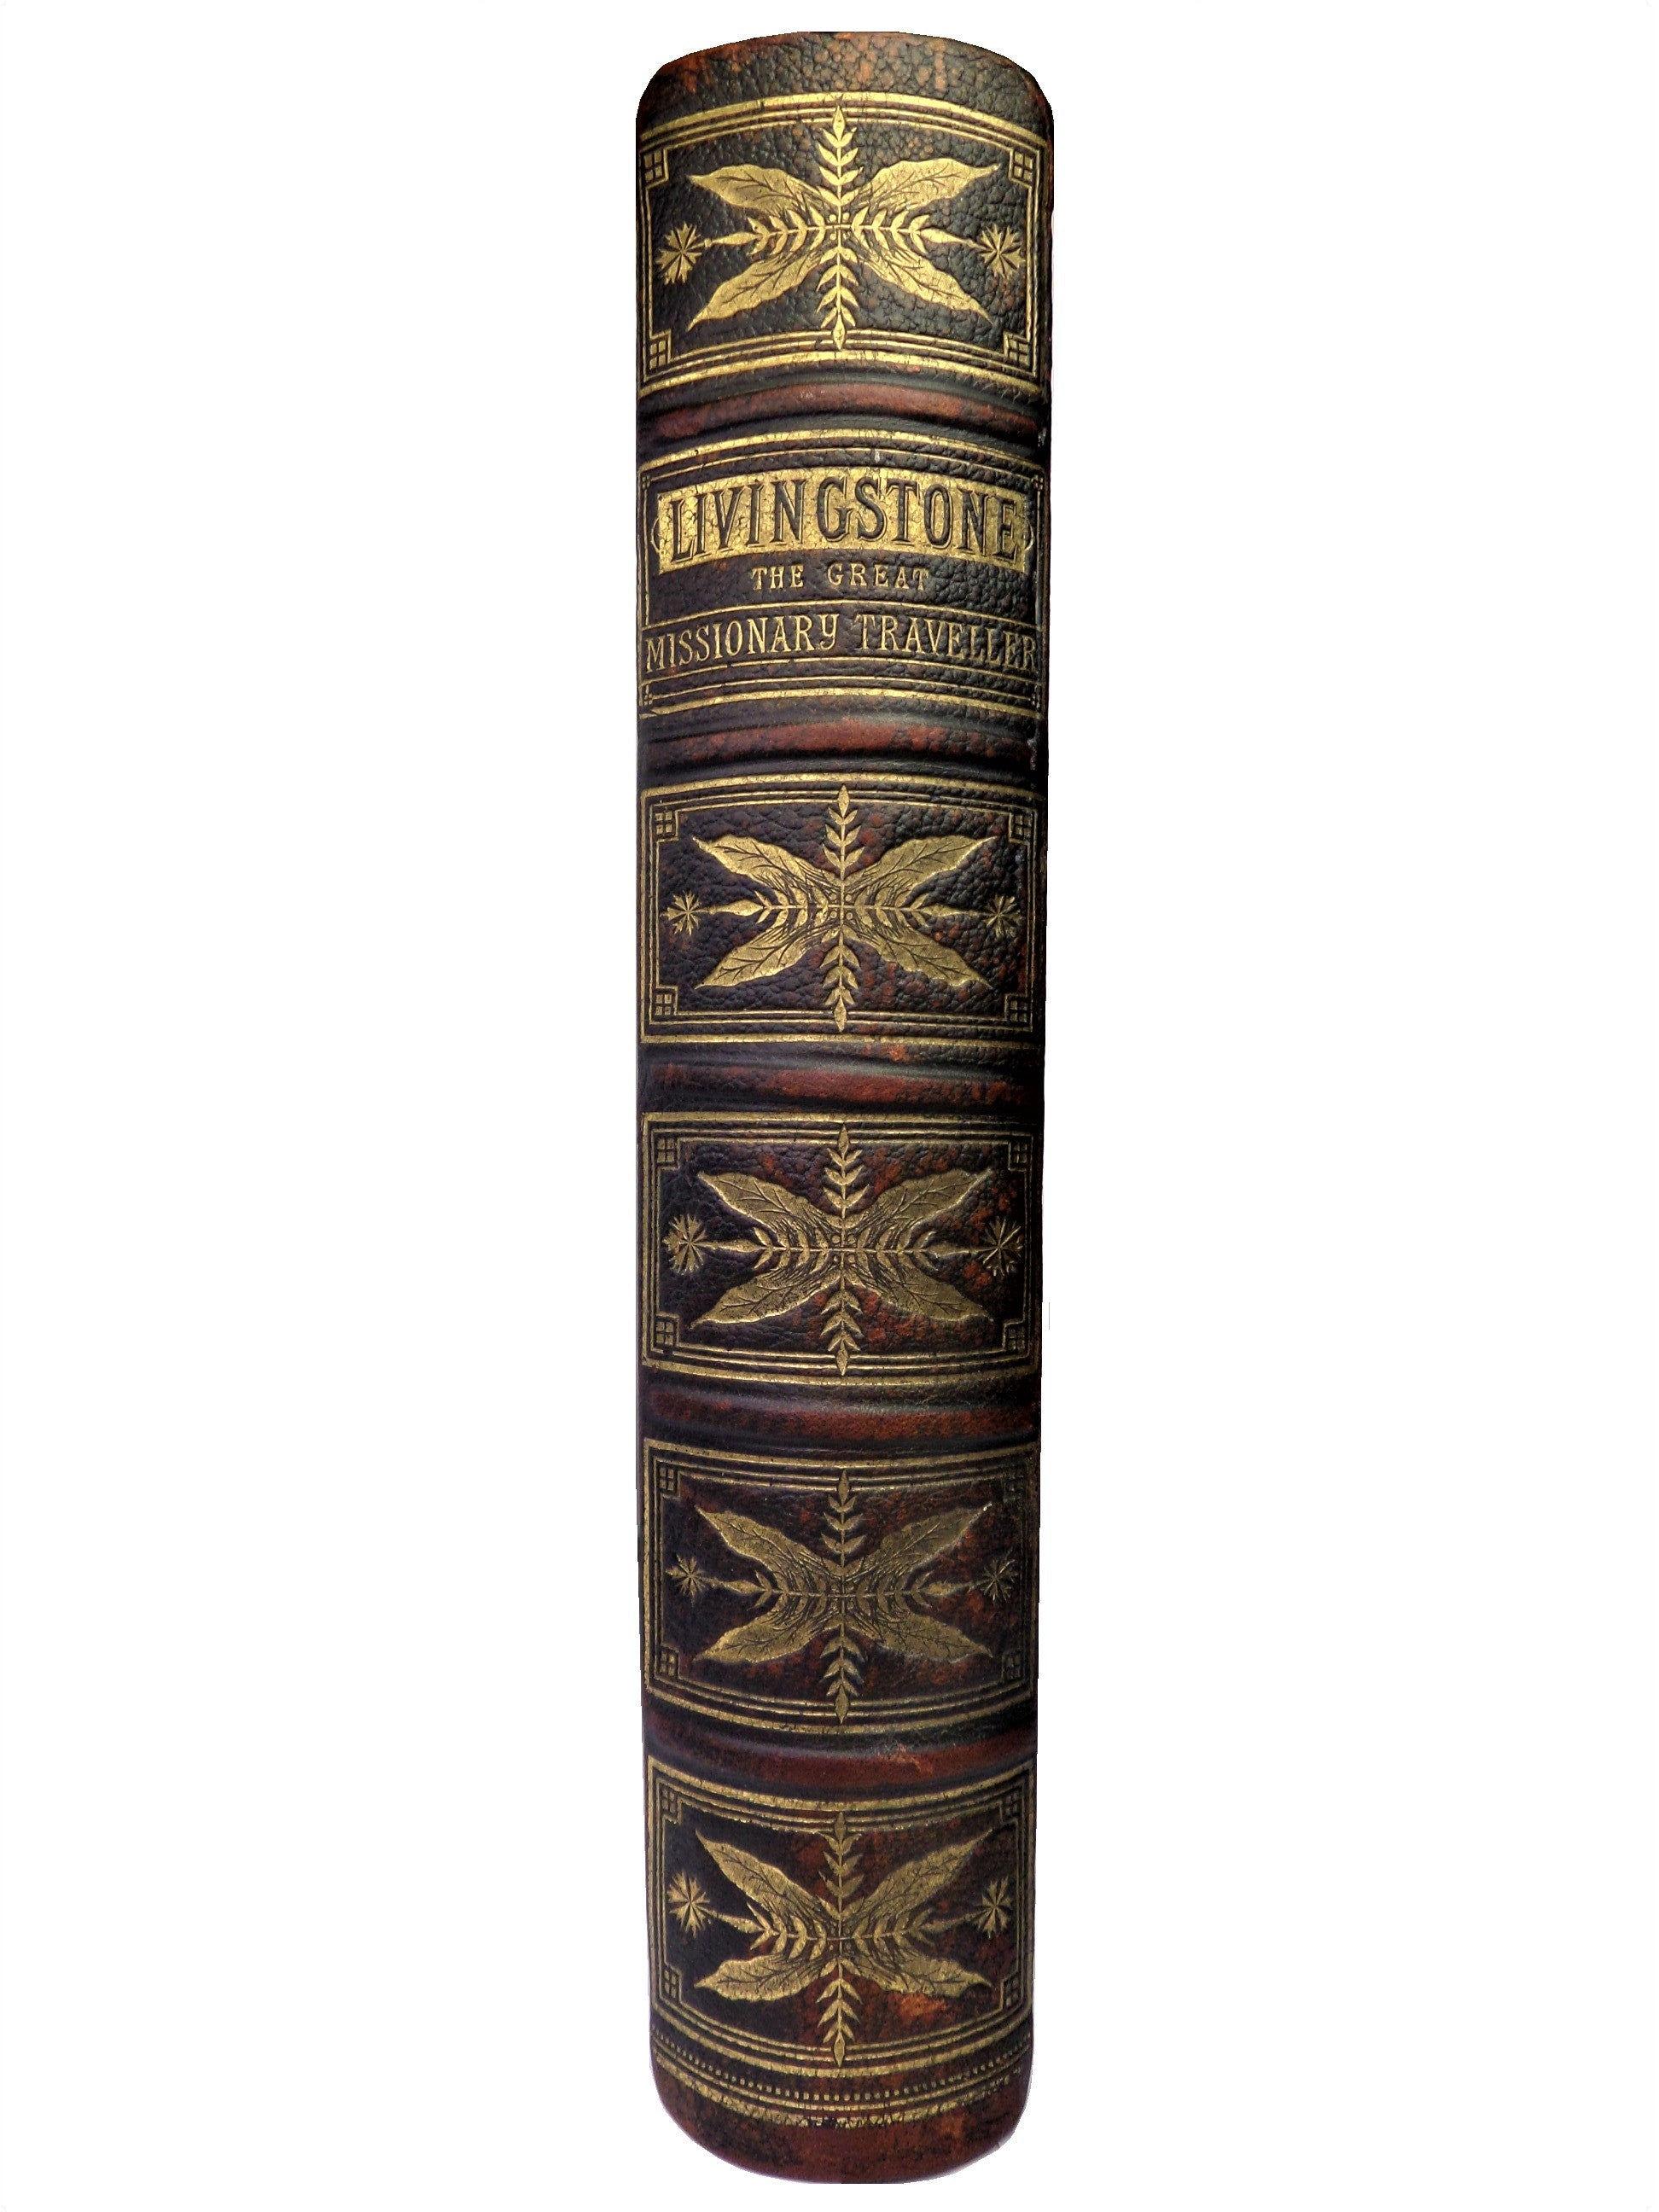 THE LIFE & EXPLORATIONS OF DR. LIVINGSTONE CA.1875 FINE LEATHER BINDING